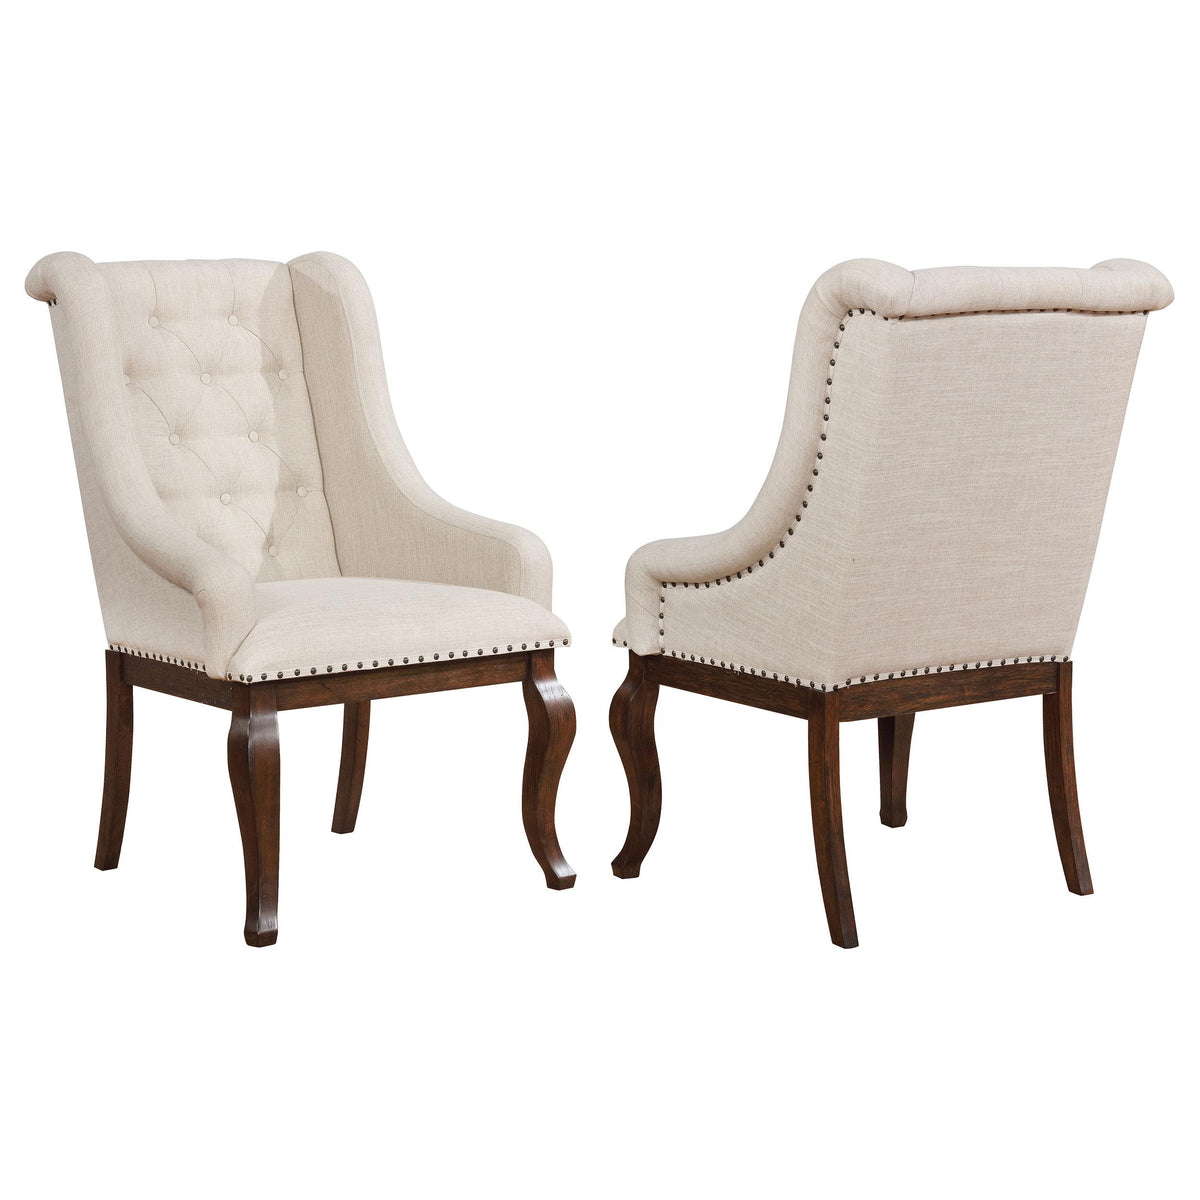 Brockway Tufted Arm Chairs Cream and Antique Java (Set of 2)  Half Price Furniture